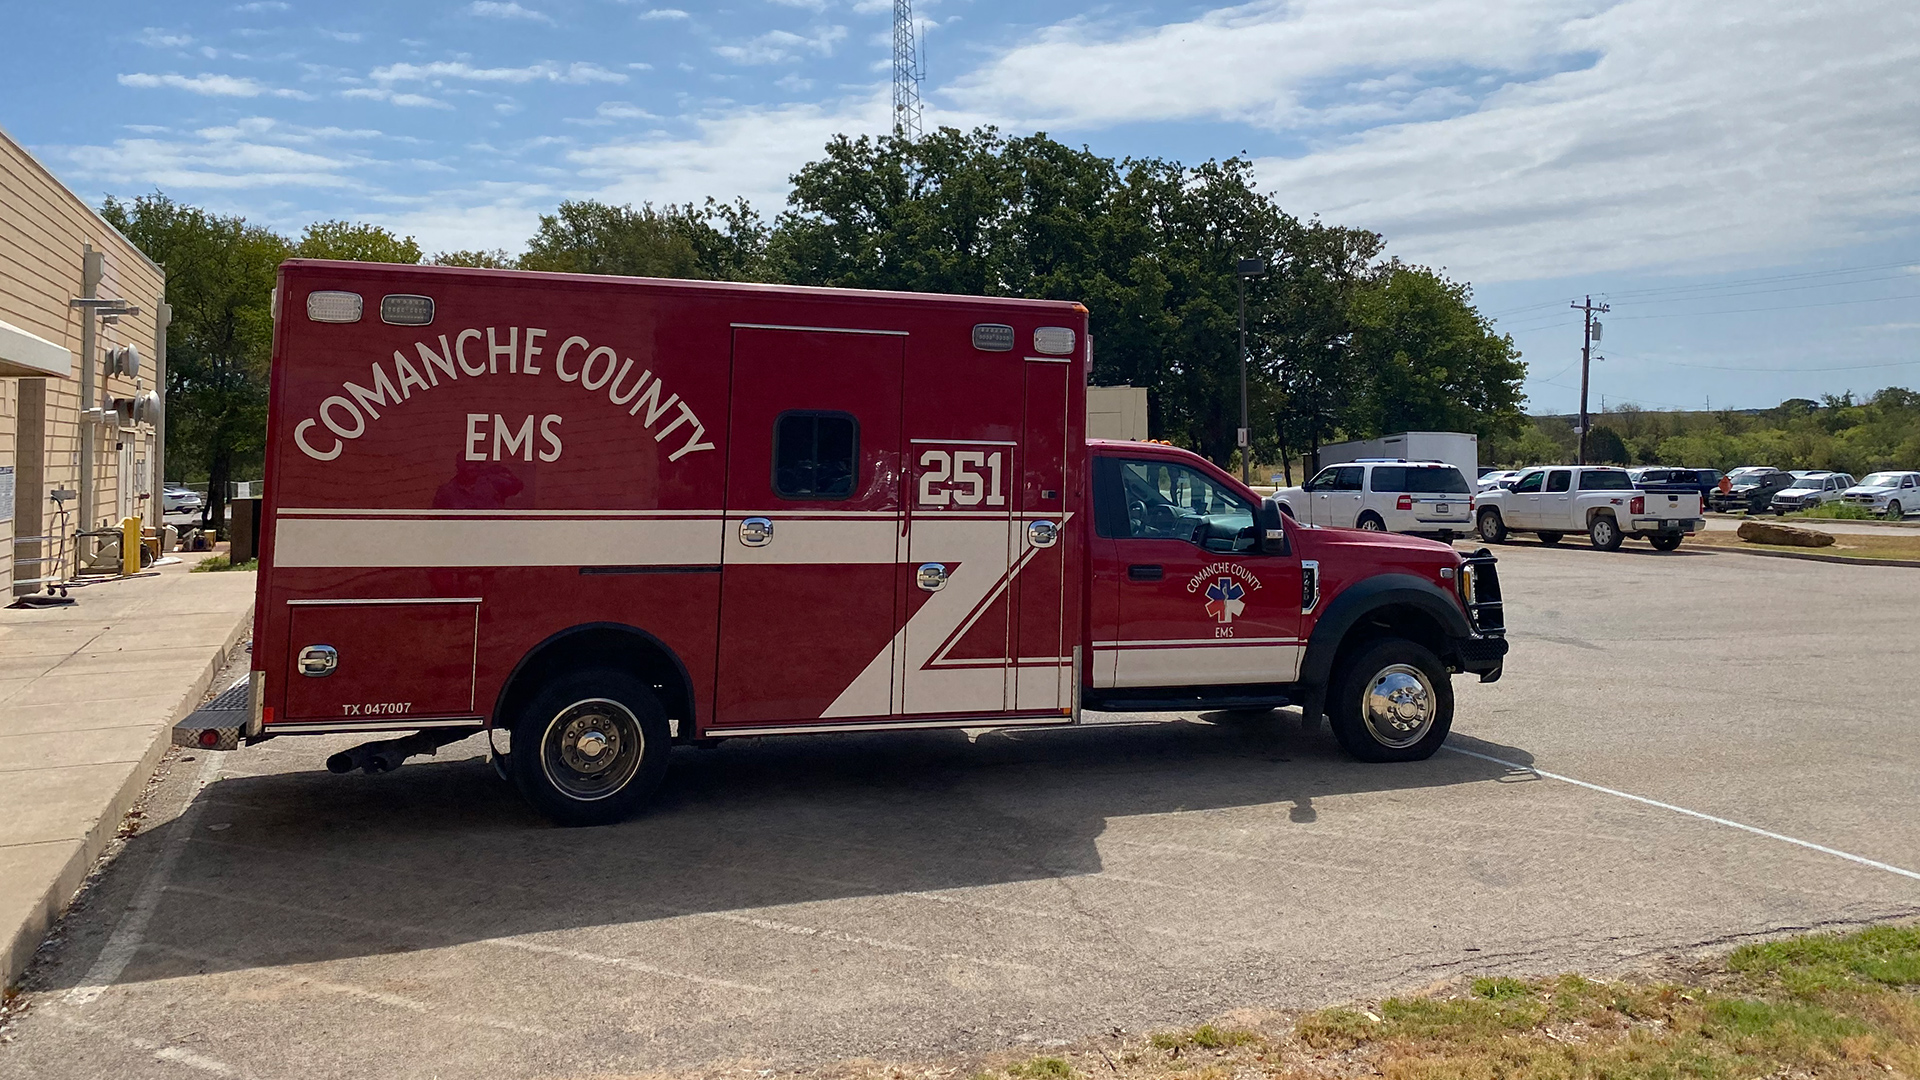 Emergency vehicle at comanche county medical center